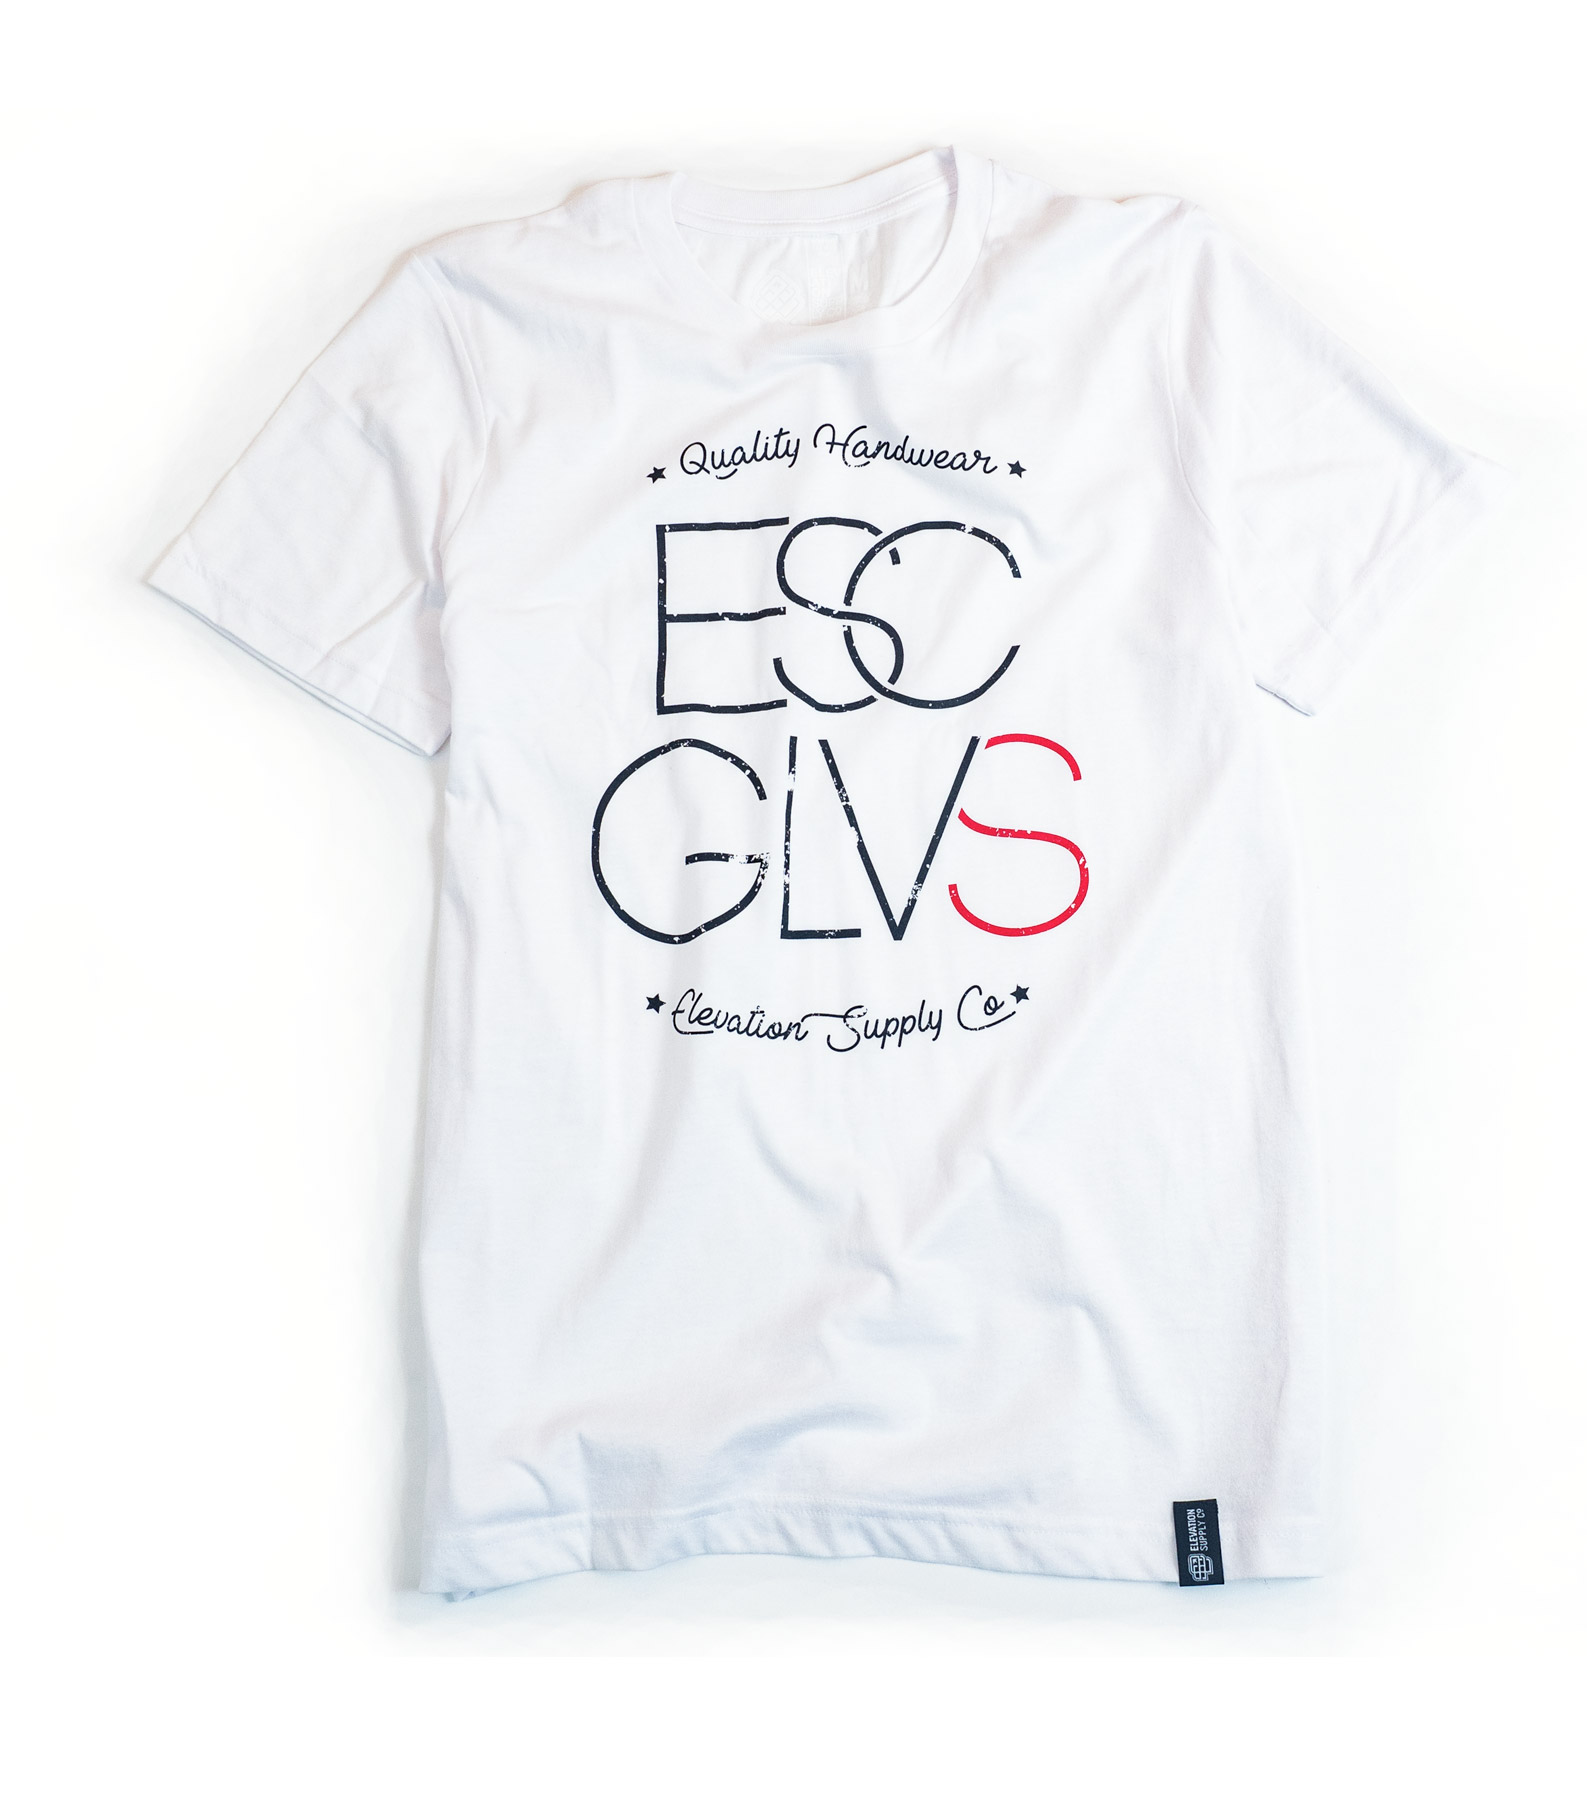 Standard Issue Tee-Shirt, A true classic to your wardrobe, ESC Gloves